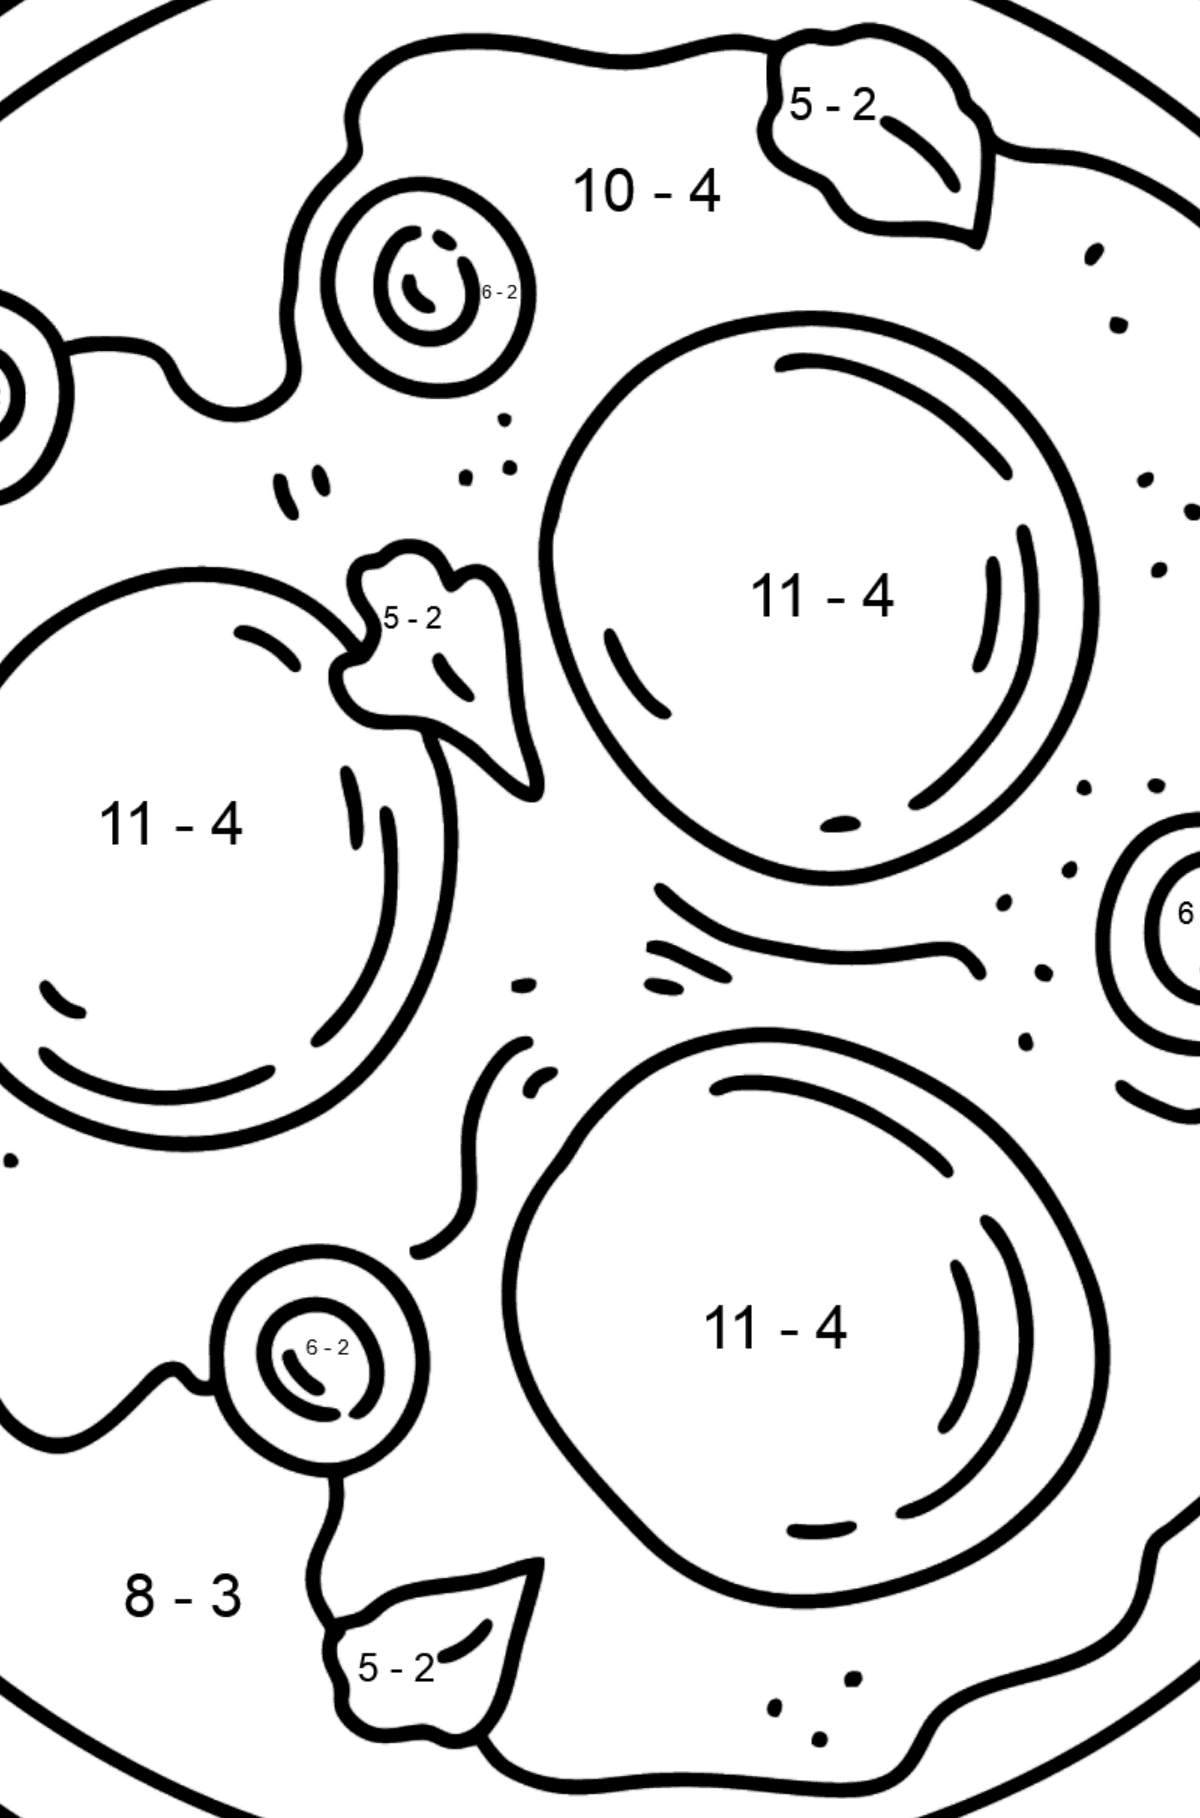 Fried Eggs Fried Egg coloring page - Math Coloring - Subtraction for Kids